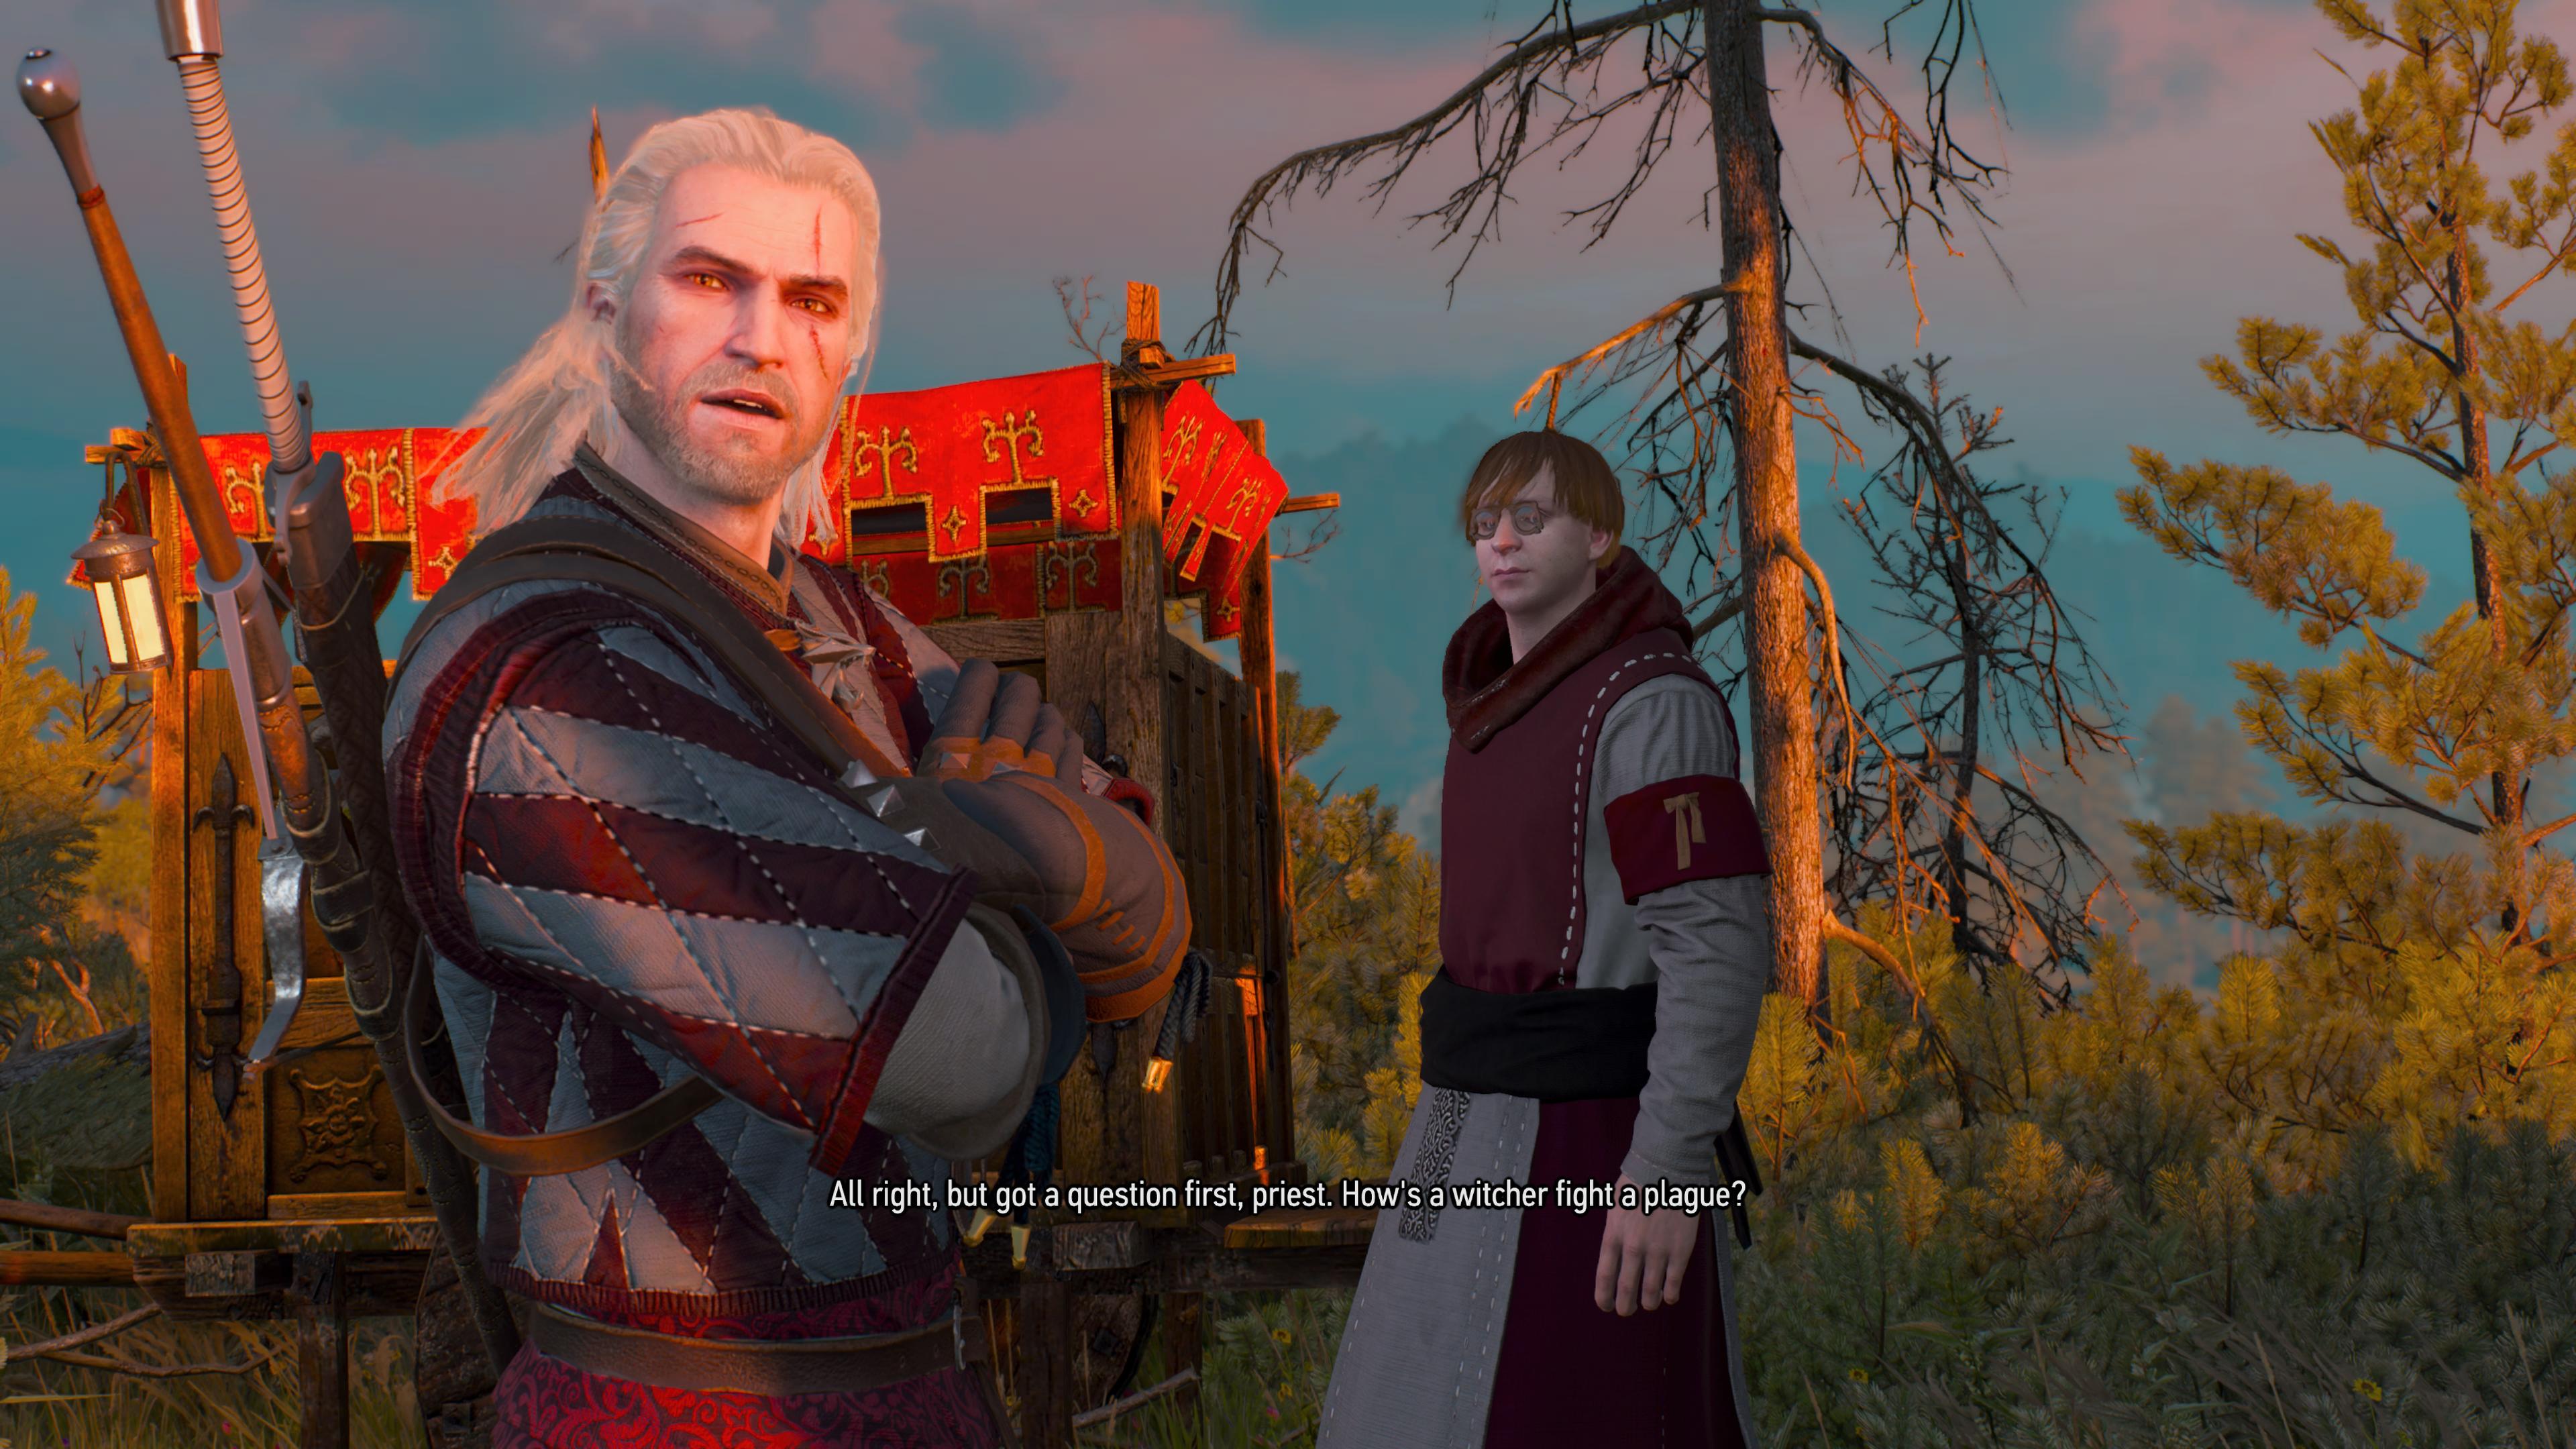 The witcher 3 in the eternal fire's shadow